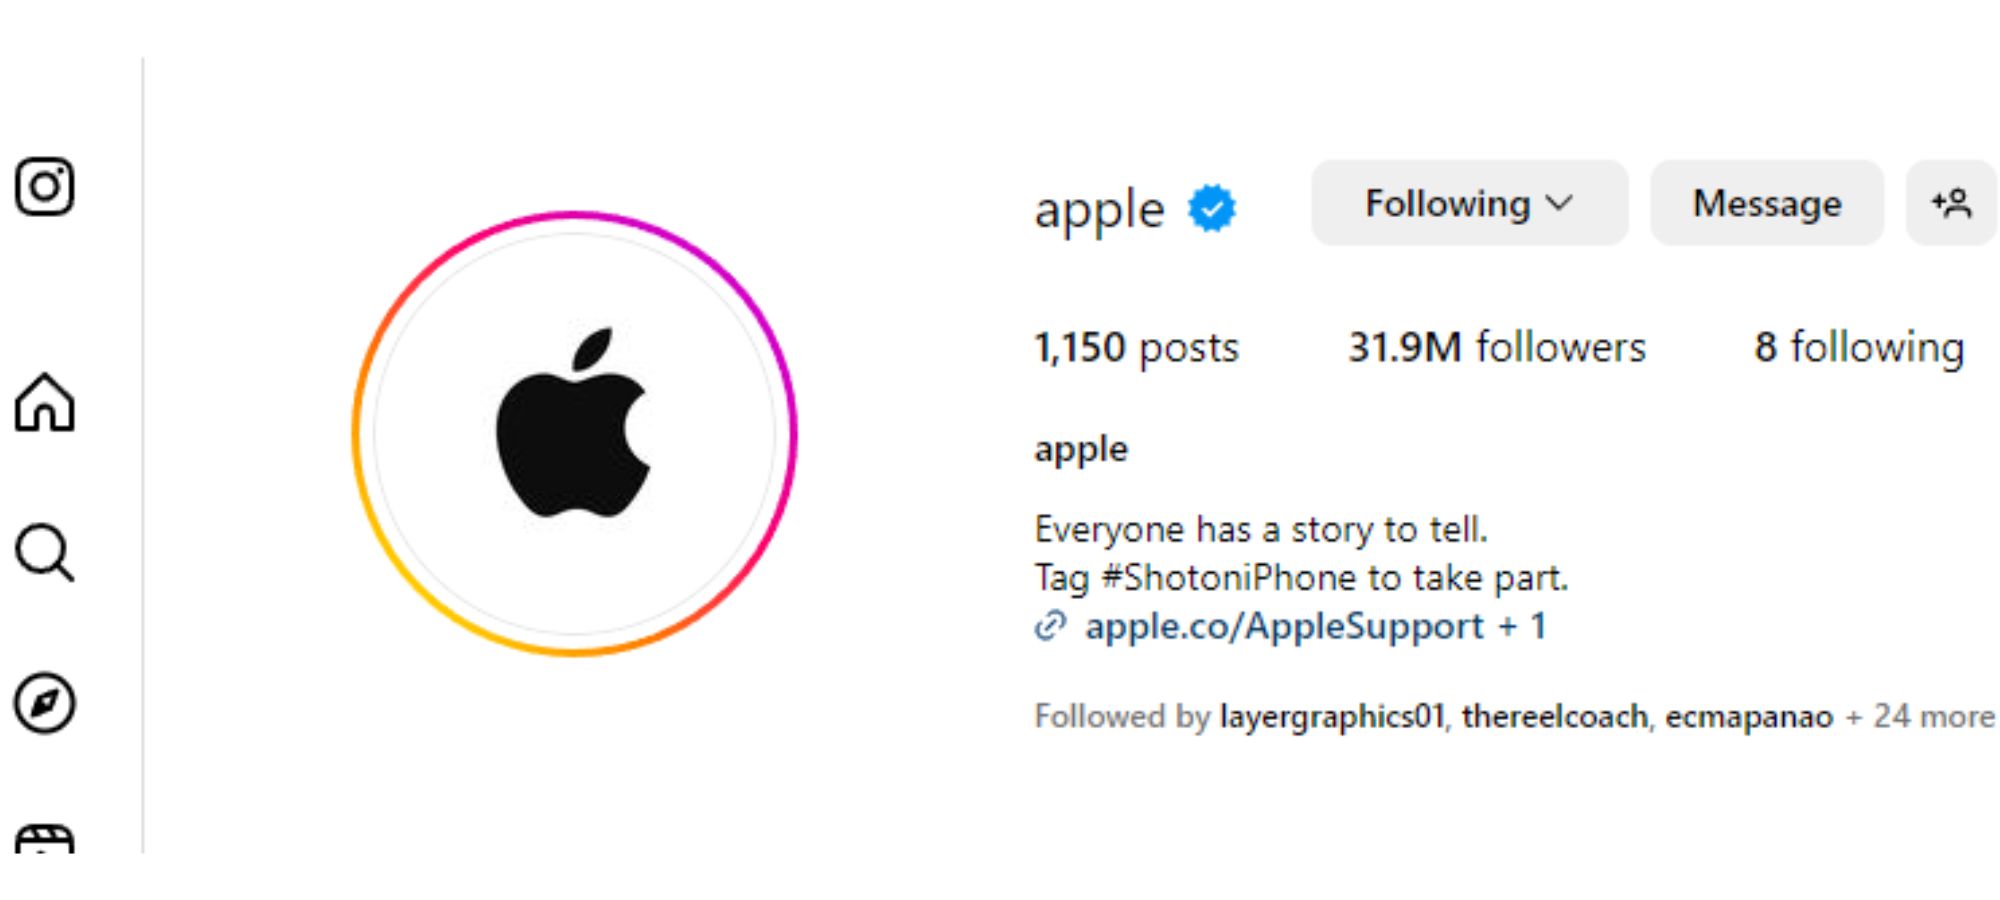 apples-instagram-account-is-live-includes-photo-marketing-campaign